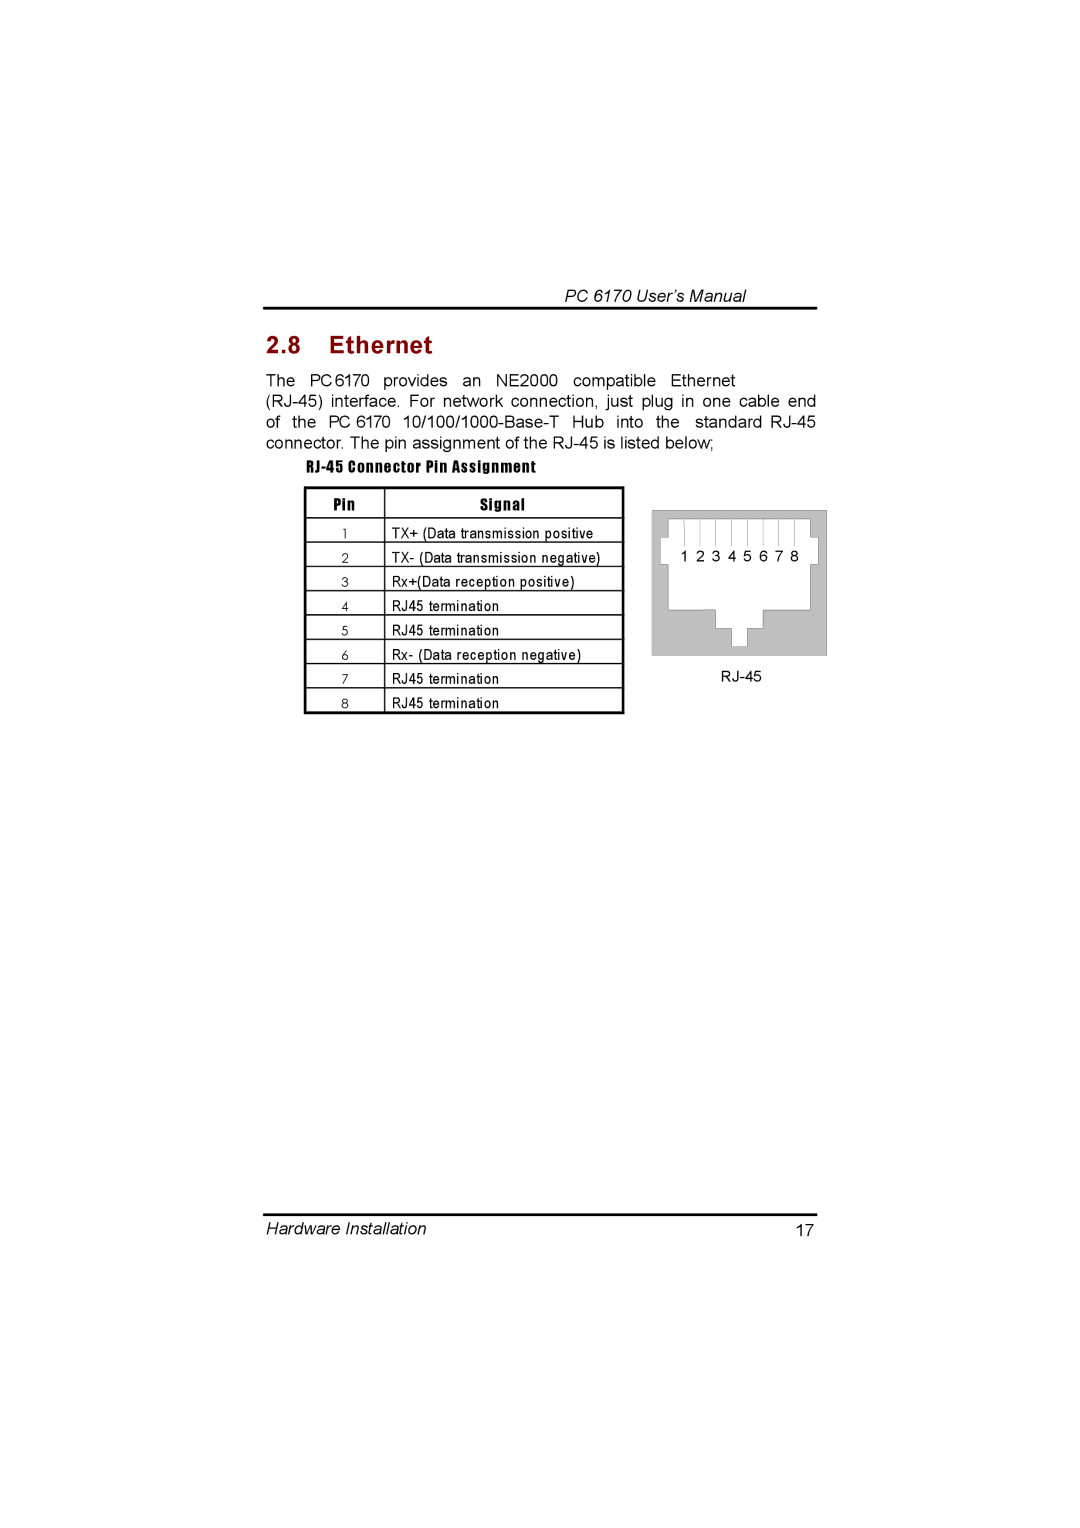 Acnodes PC 6170 manual Ethernet, RJ-45 Connector Pin Assignment 